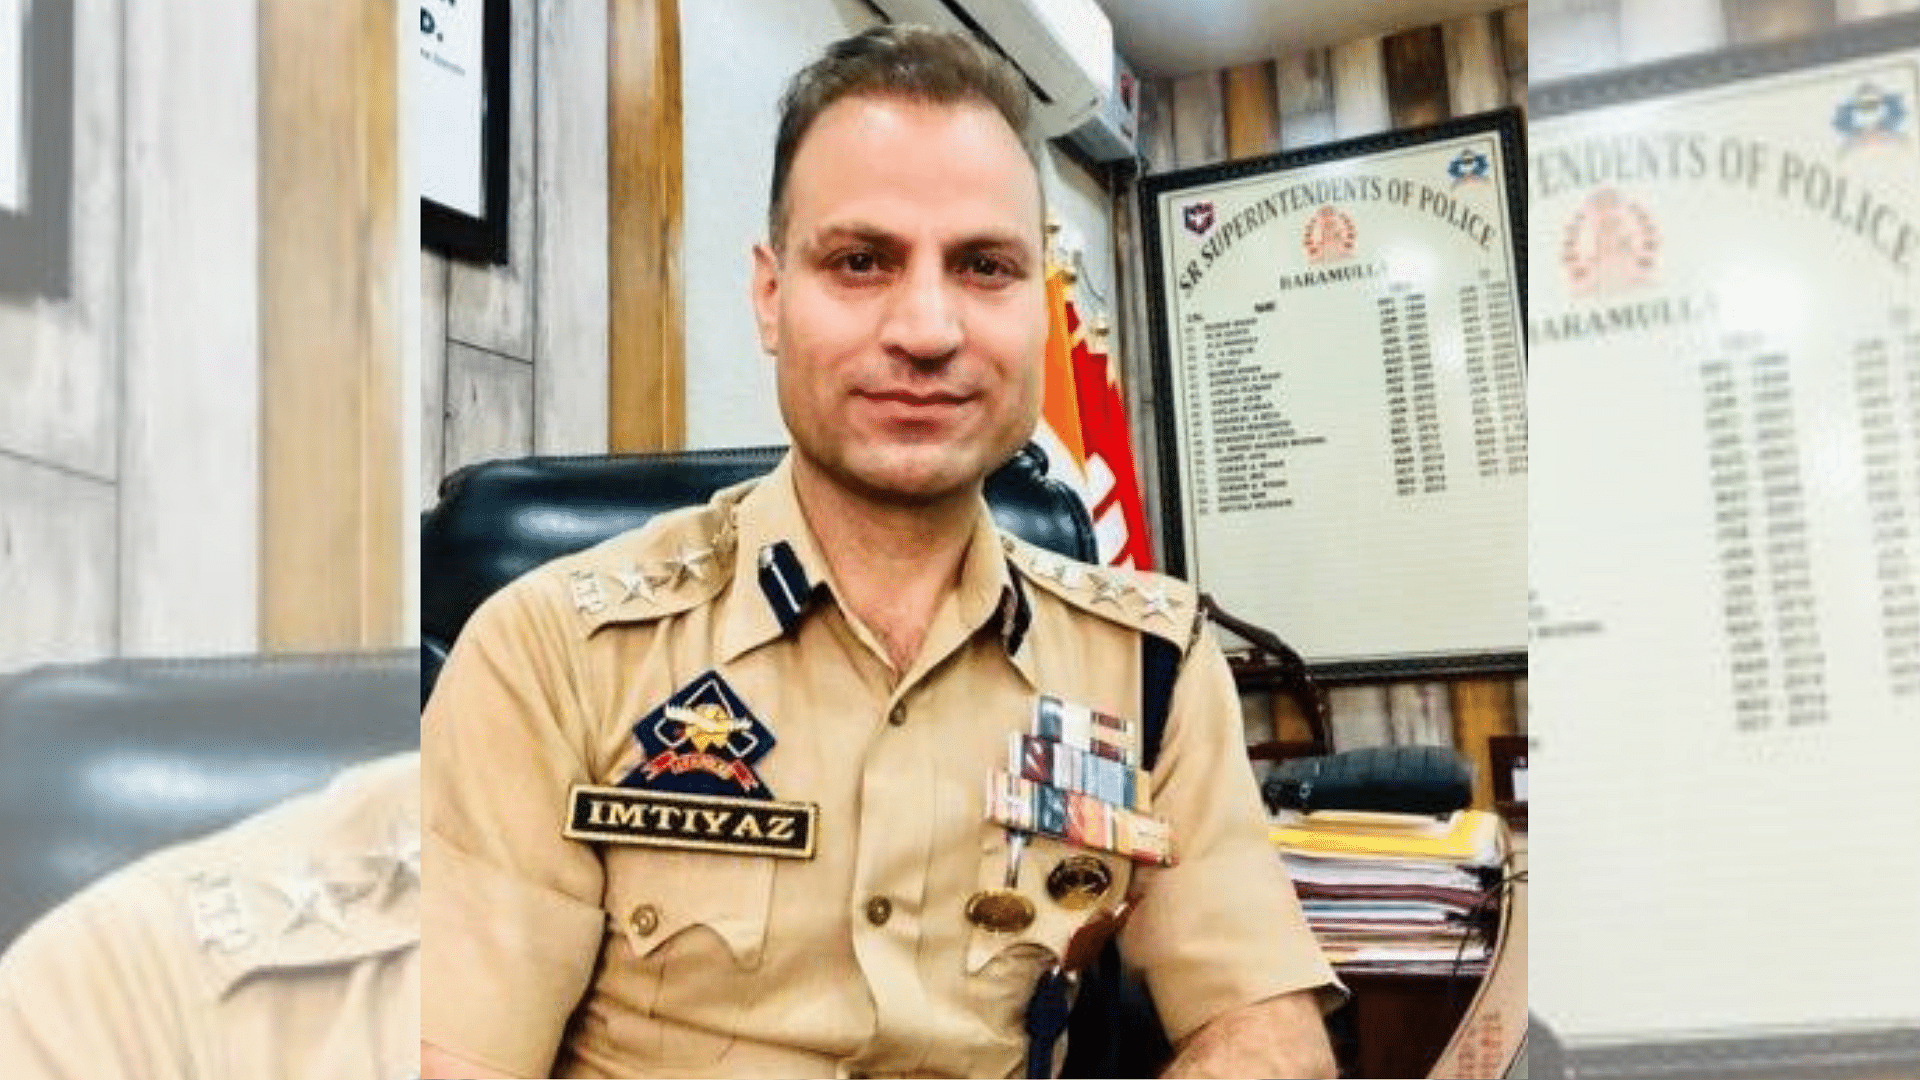 Senior J&amp;K police officer Imtiyaz Hussain said that the perception being created against him was “slanderous.”